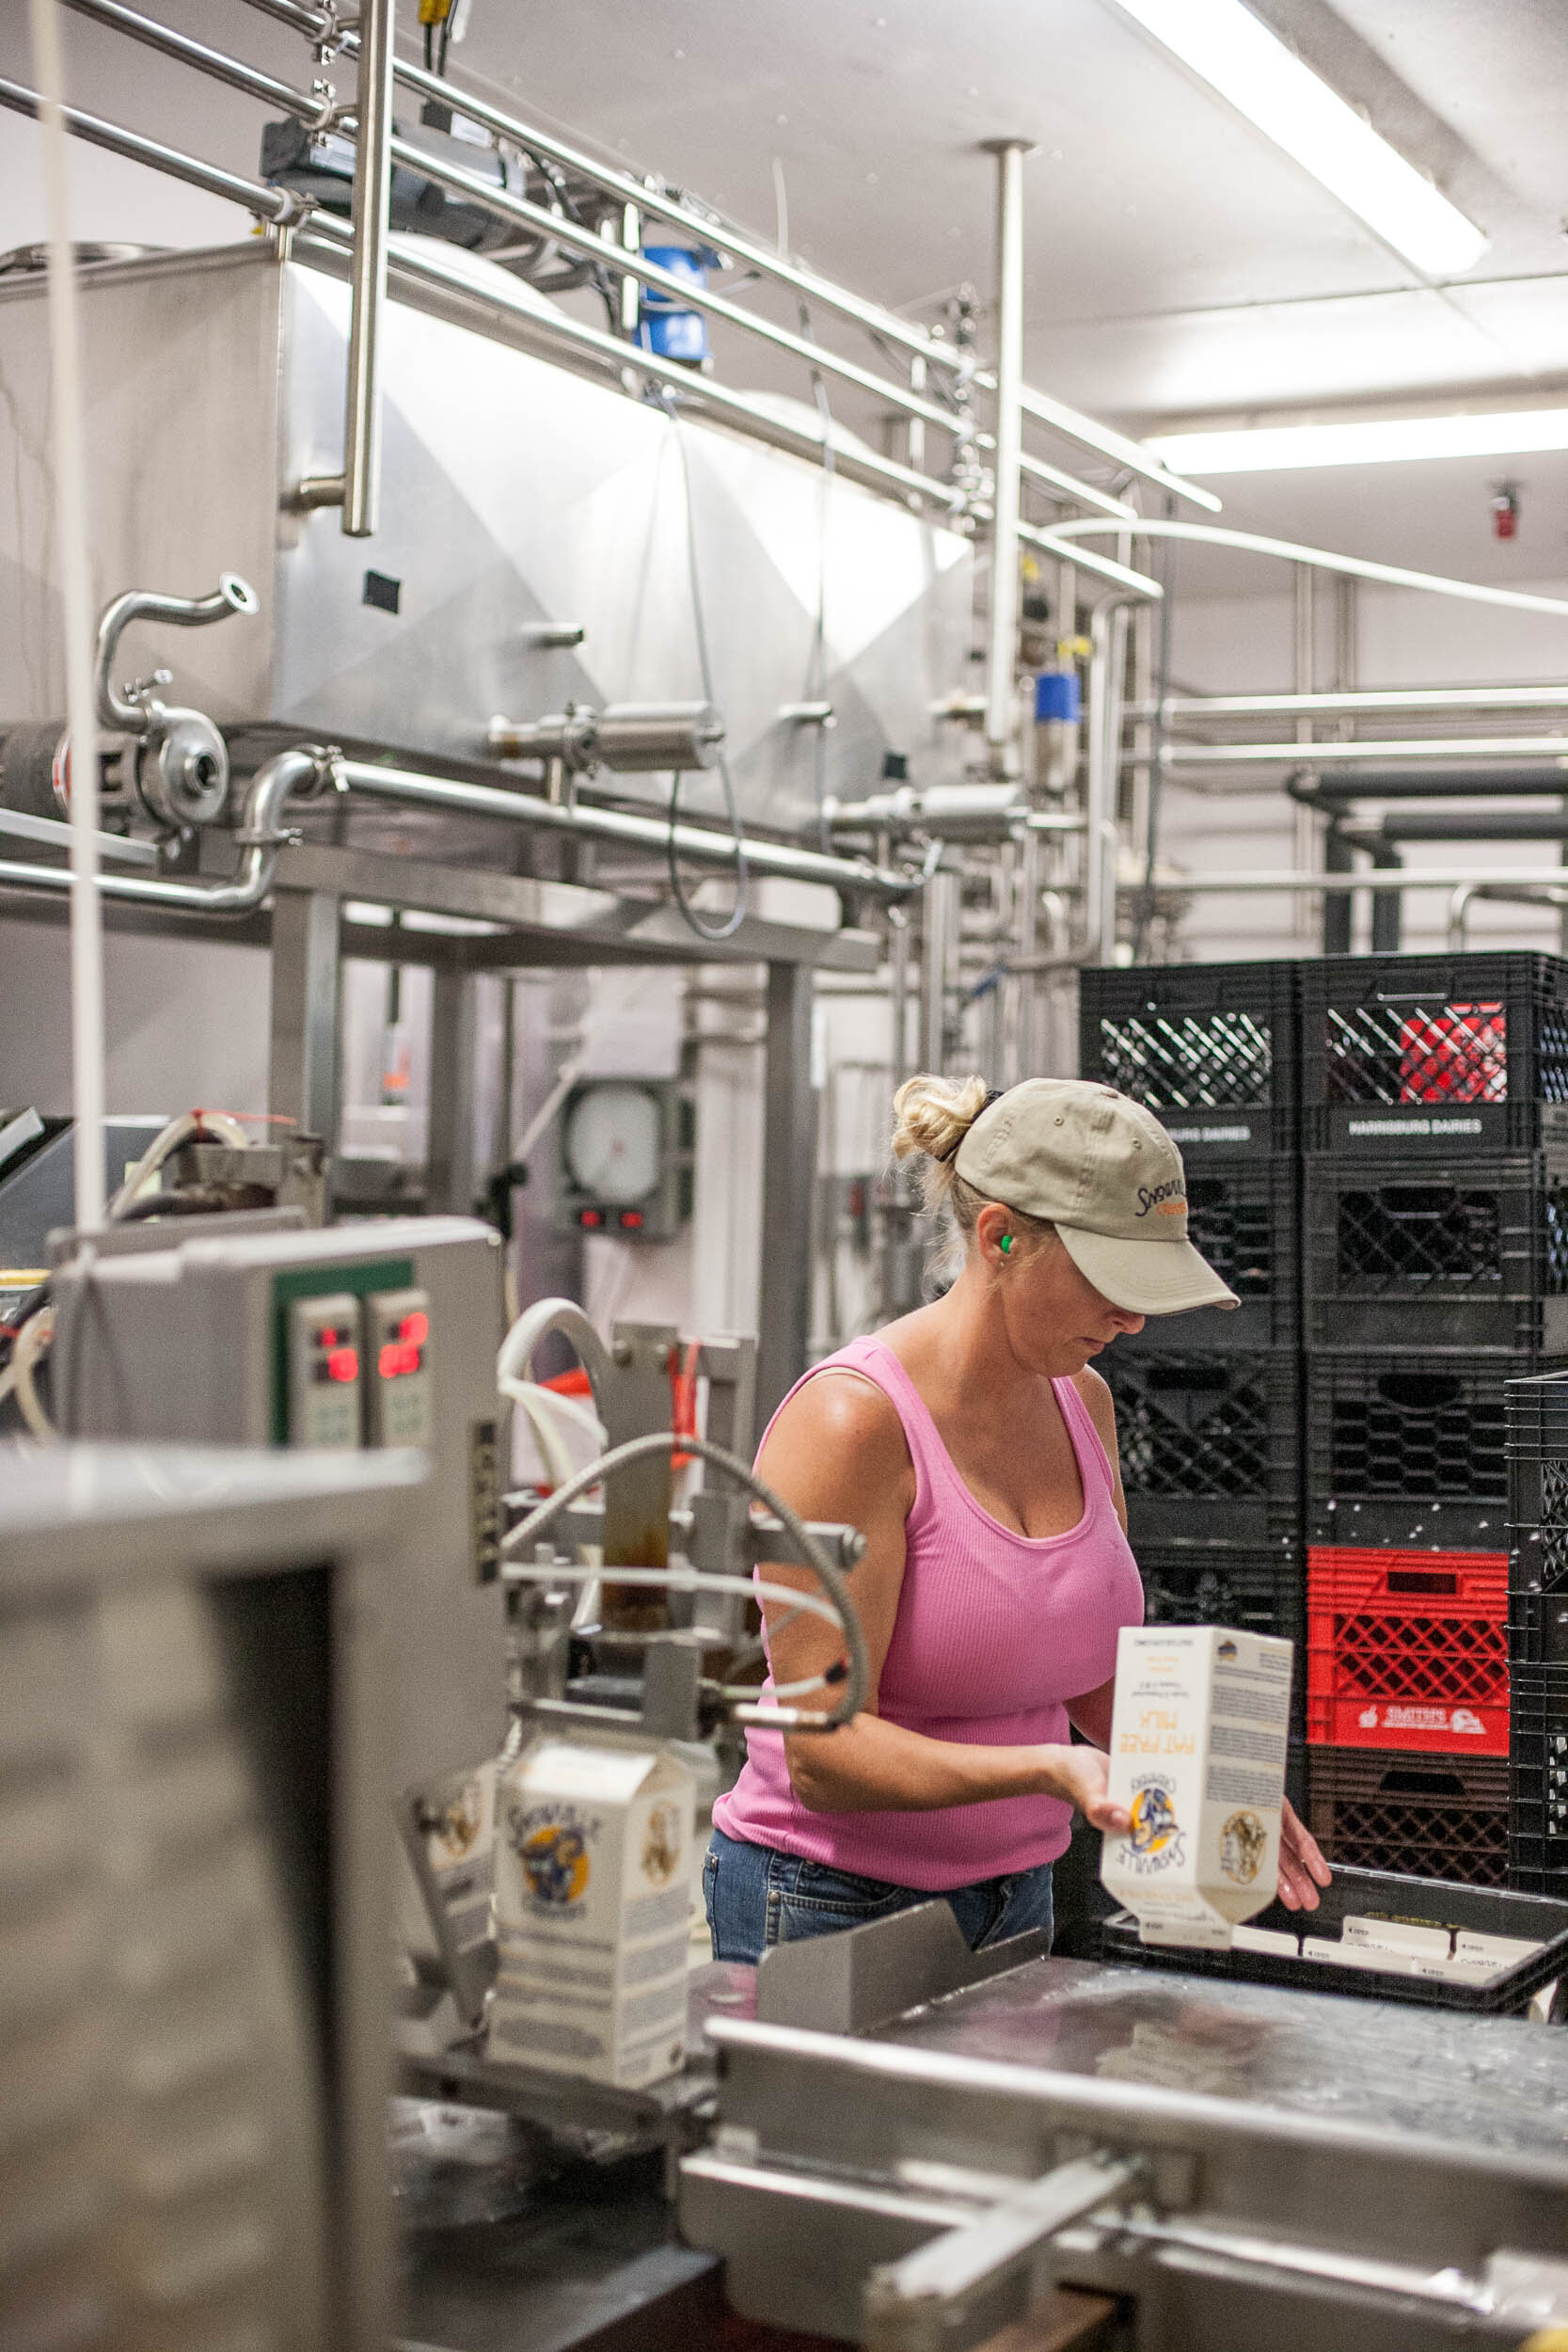  The Snowville Creamery plant, housed in an unassuming outbuilding on the Dix/Hall farm, is small but efficient, processing 16,000 gallons of dairy product a week. Plant manager John Stock says the facility can handle more volume as demand increases.